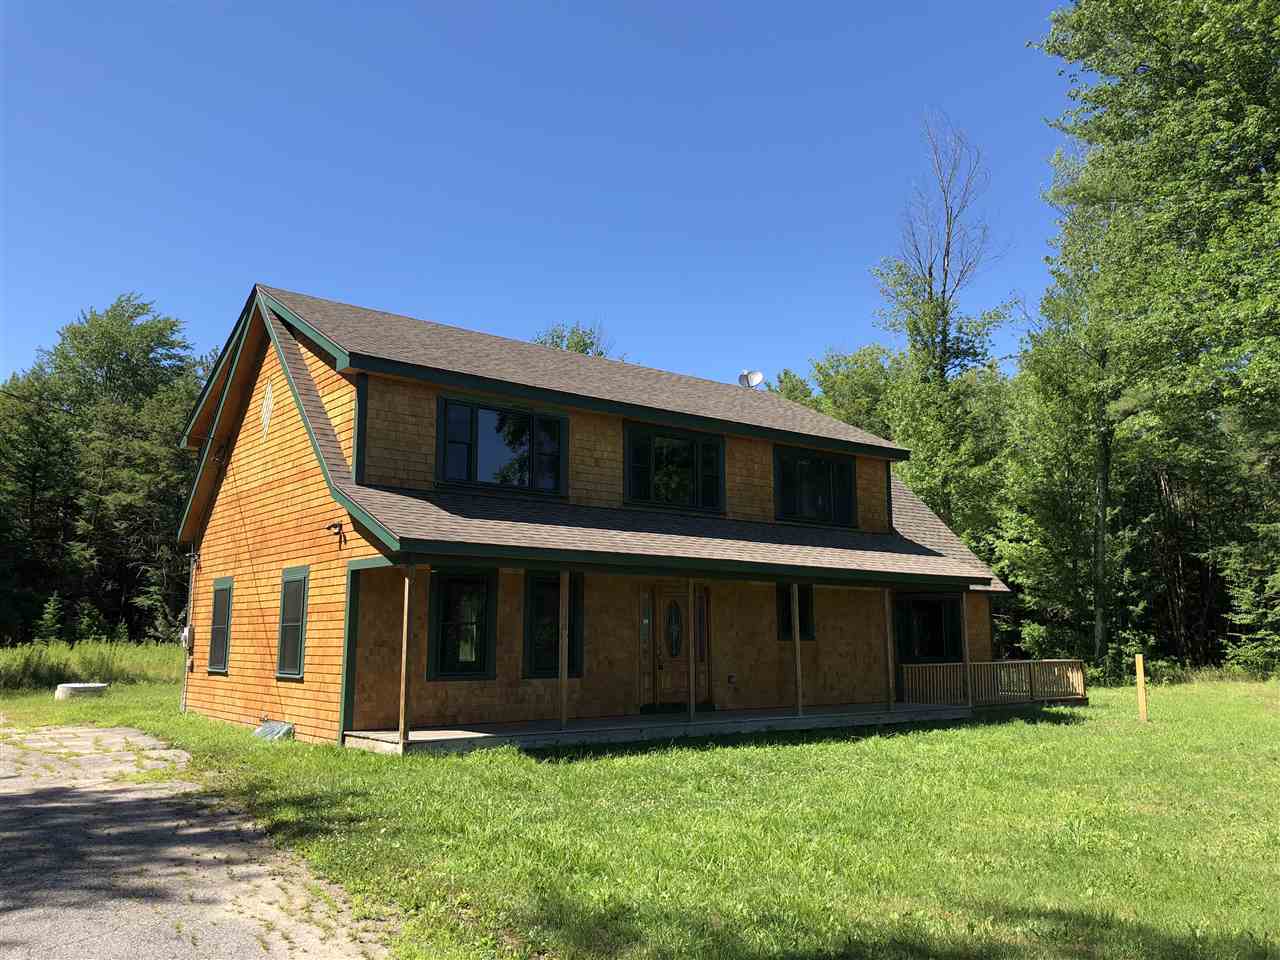 730 Greenfield Rd, Peterborough, NH 03458 | MLS# 4691197 | Redfin